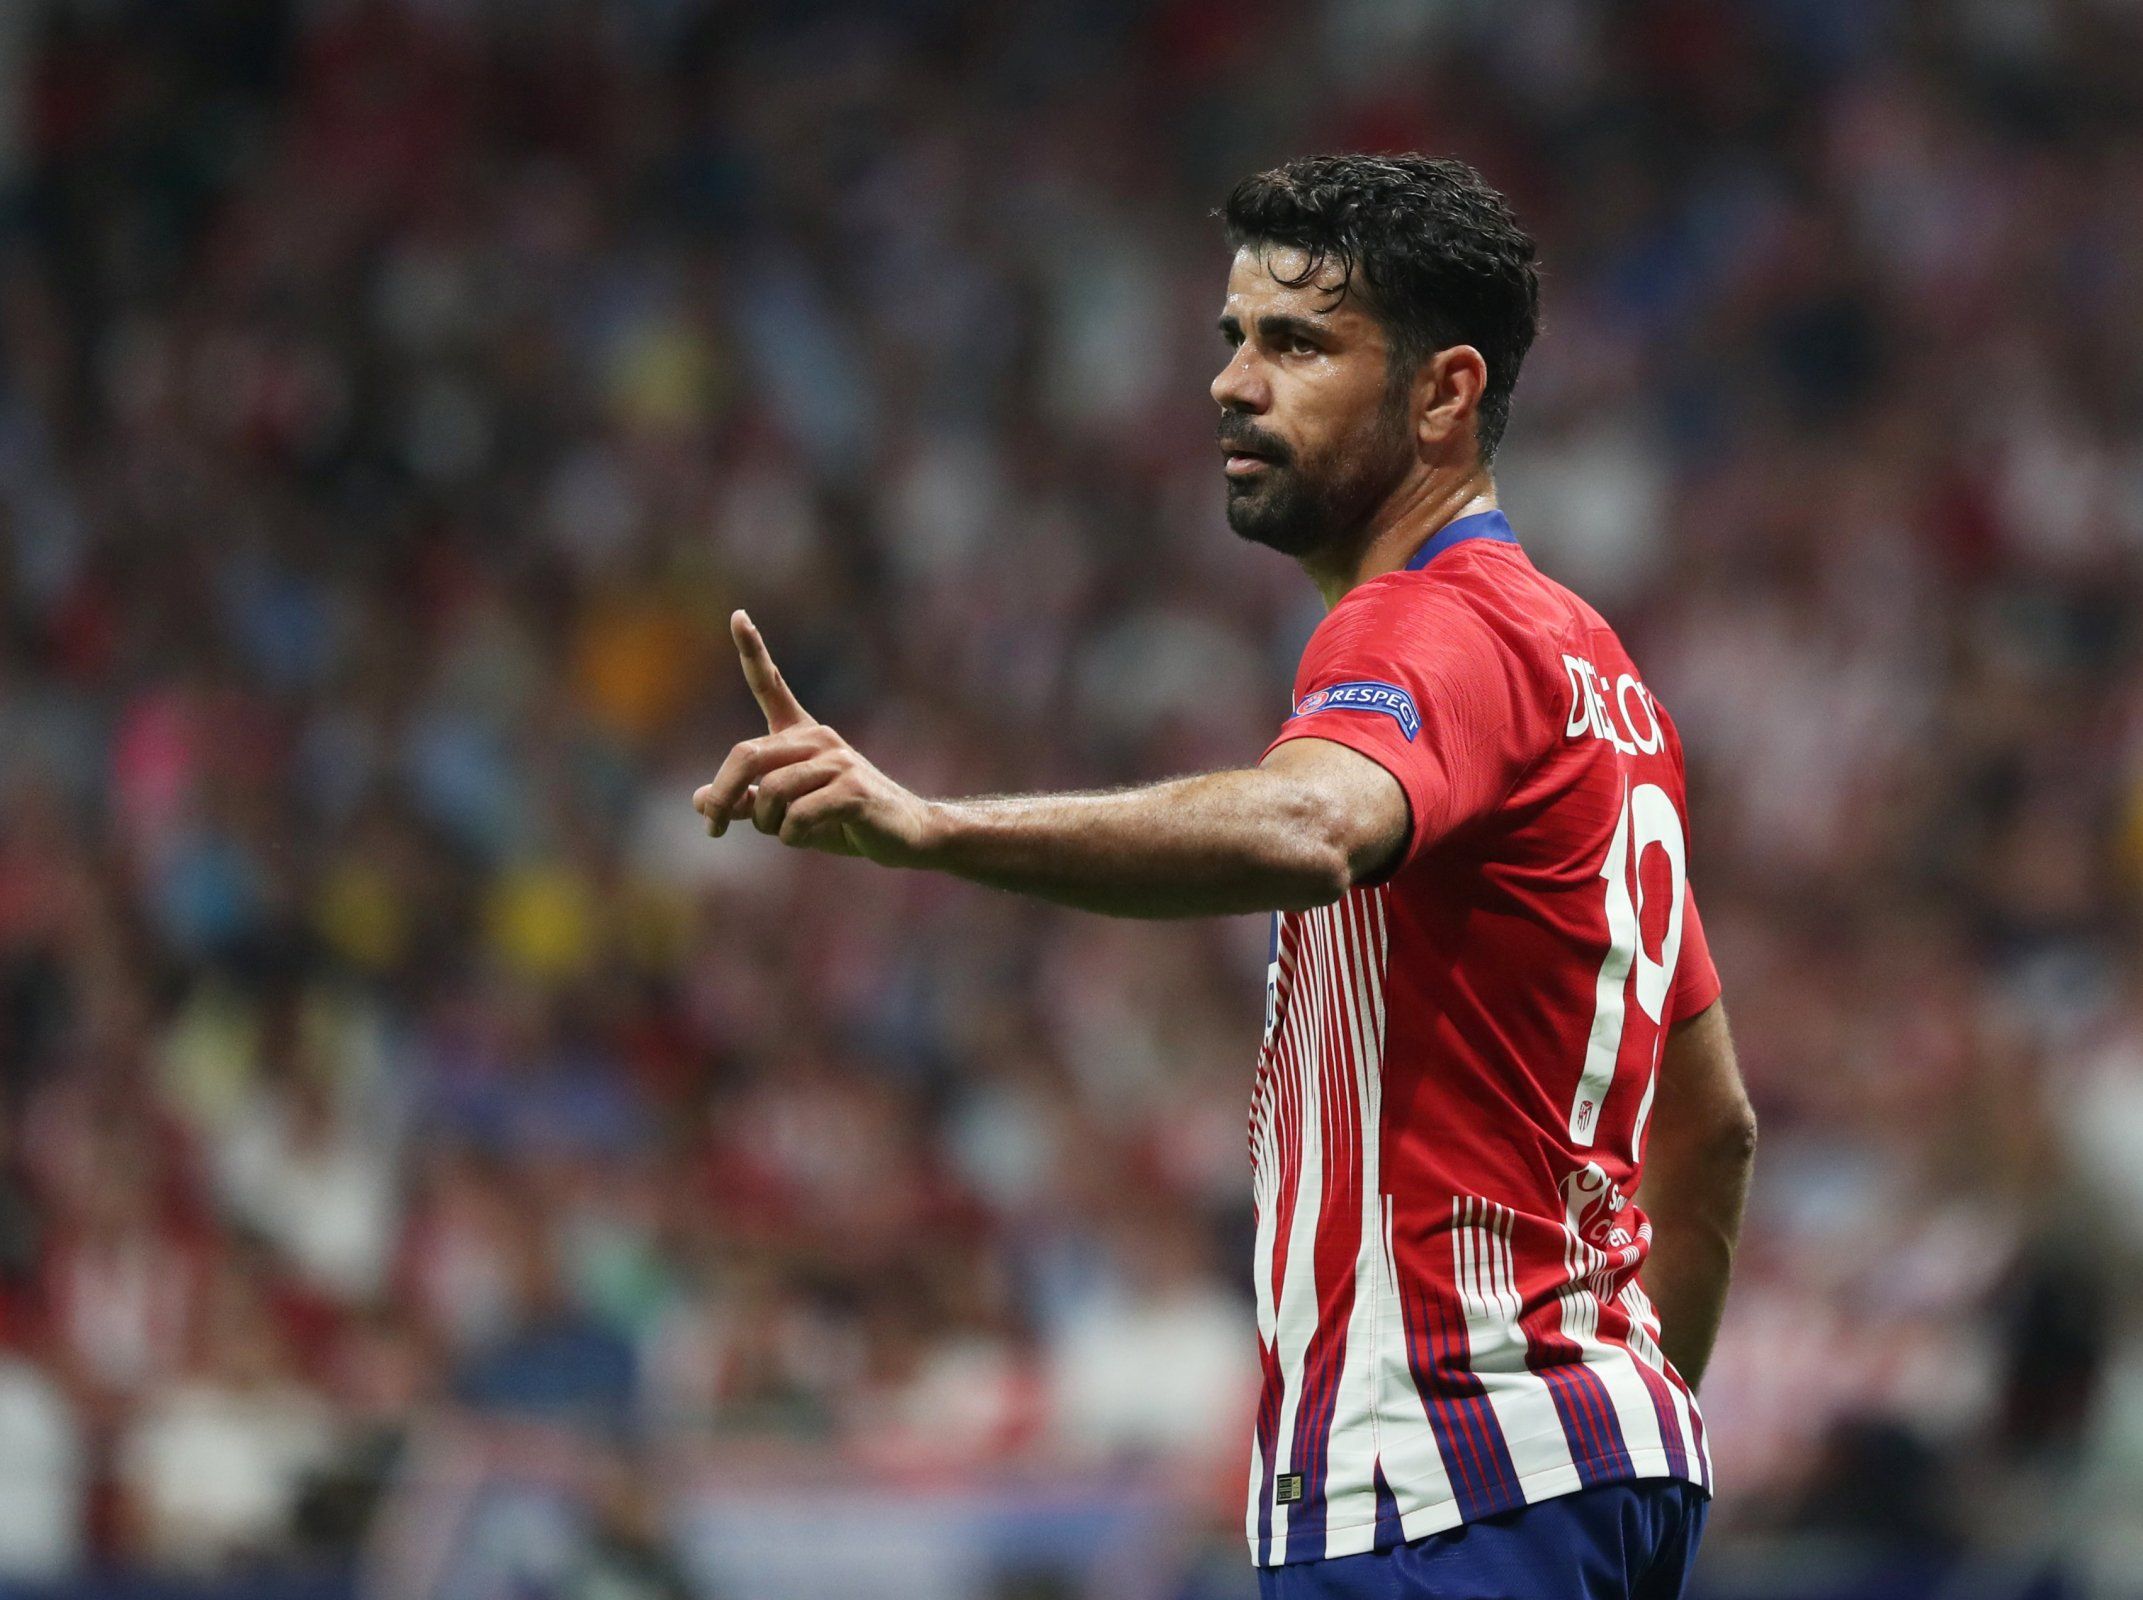 Diego Costa in action for Atletico Madrid against Club Brugge in the Champions League